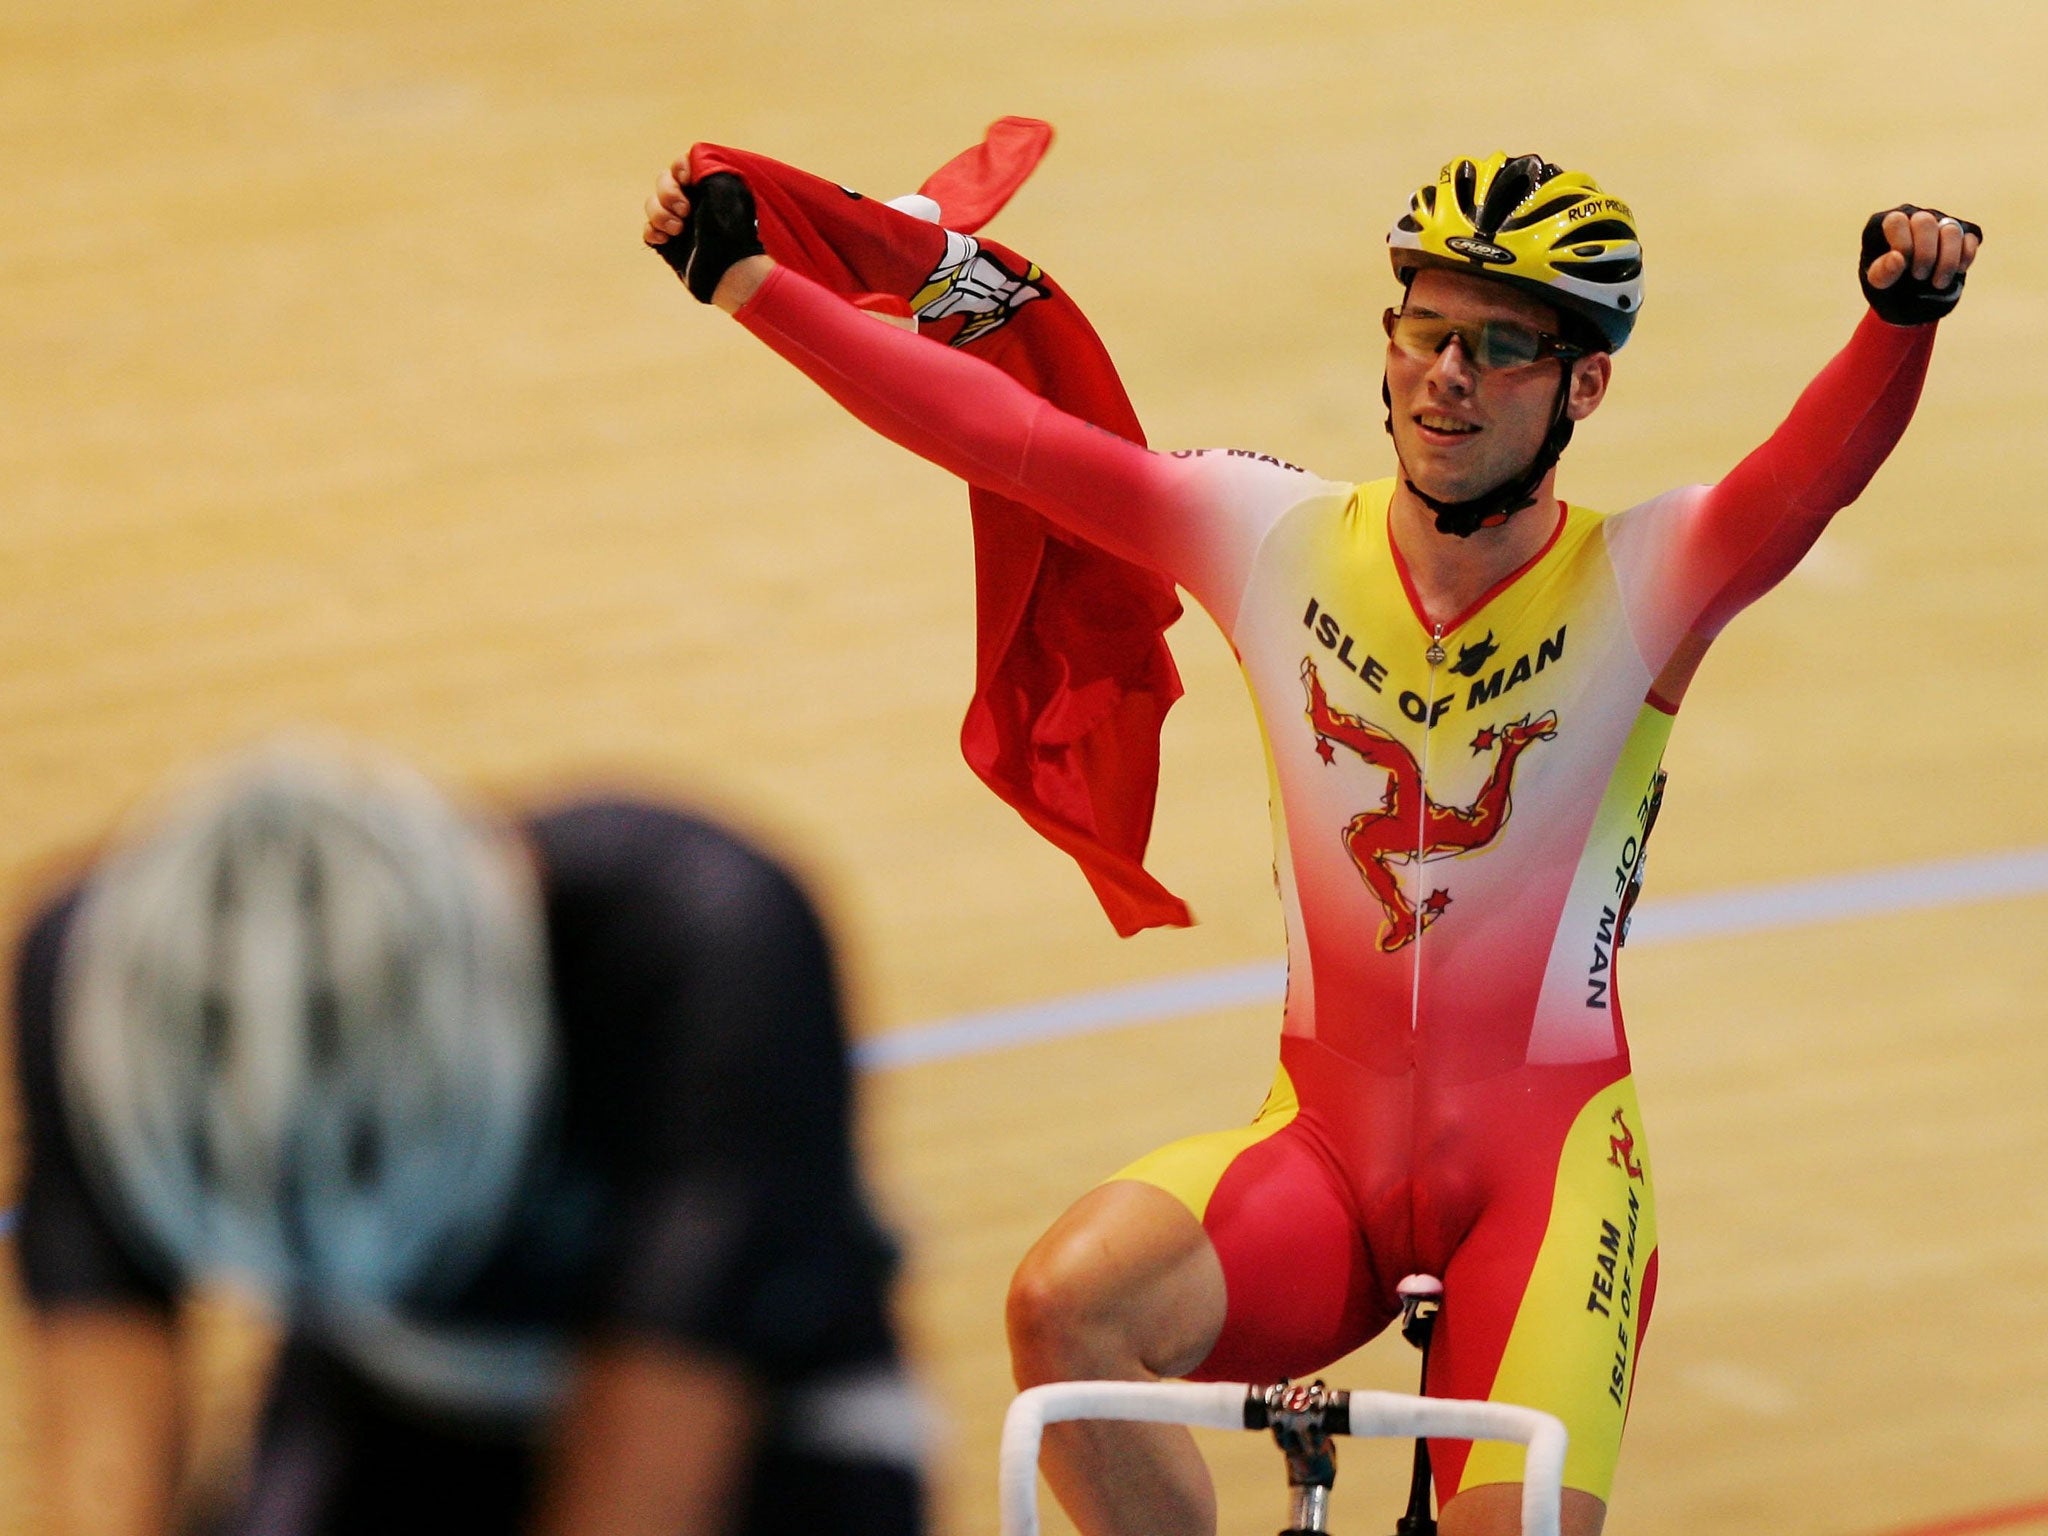 Mark Cavendish celebrates after winning gold for the Isle of Man at the 2006 Commonwealth Games in Melbourne